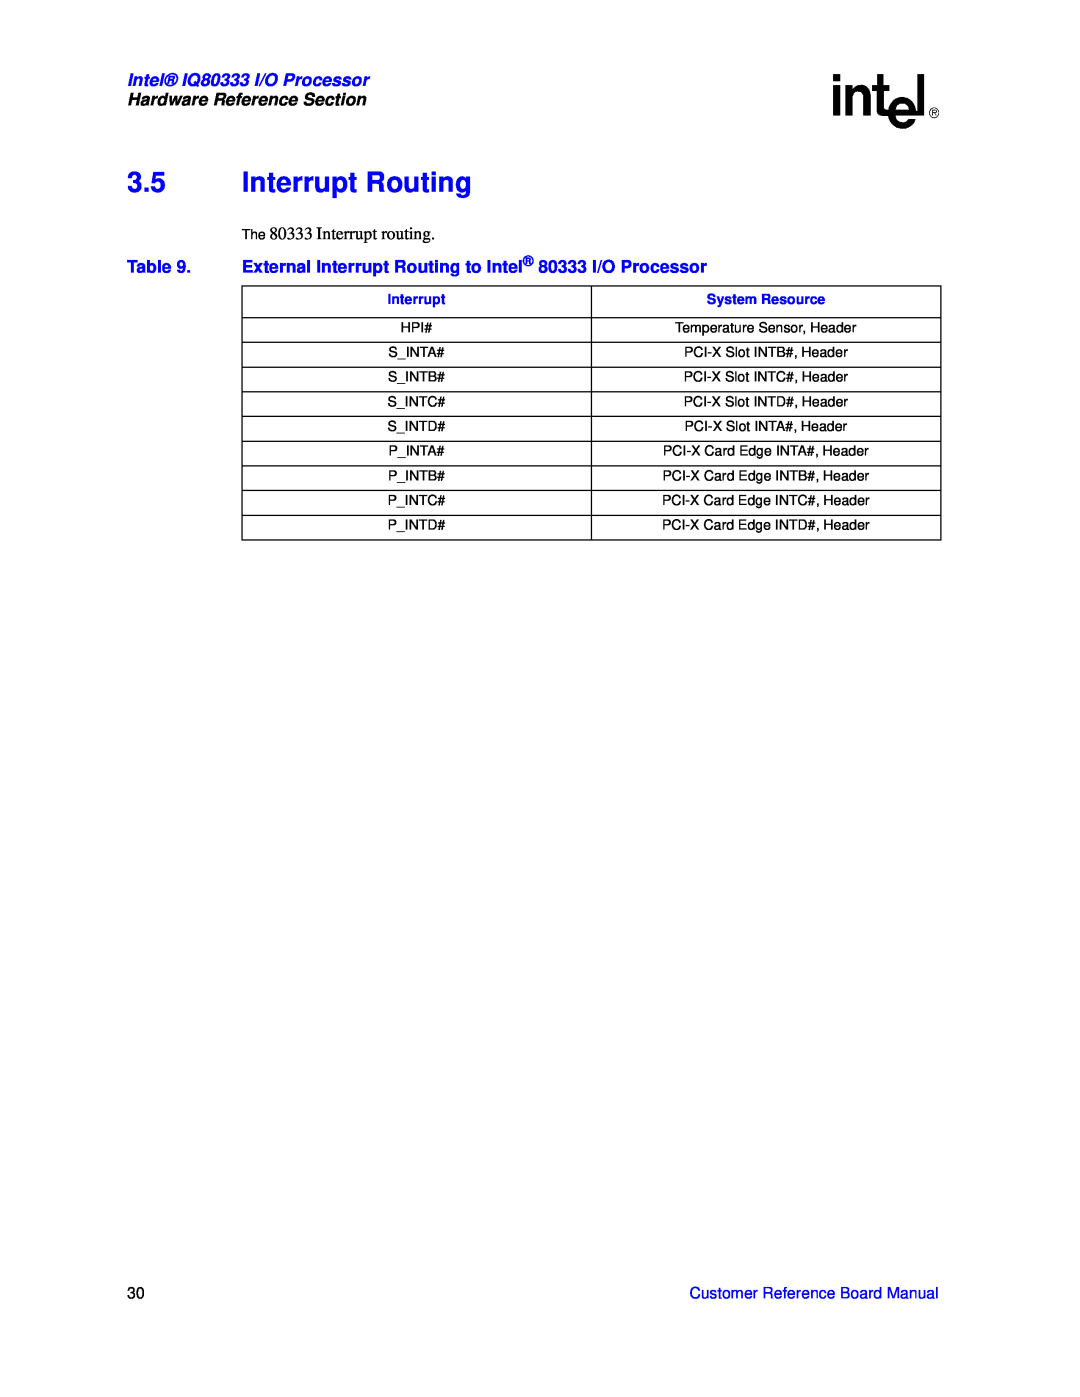 Intel manual 3.5Interrupt Routing, Intel IQ80333 I/O Processor, Hardware Reference Section 